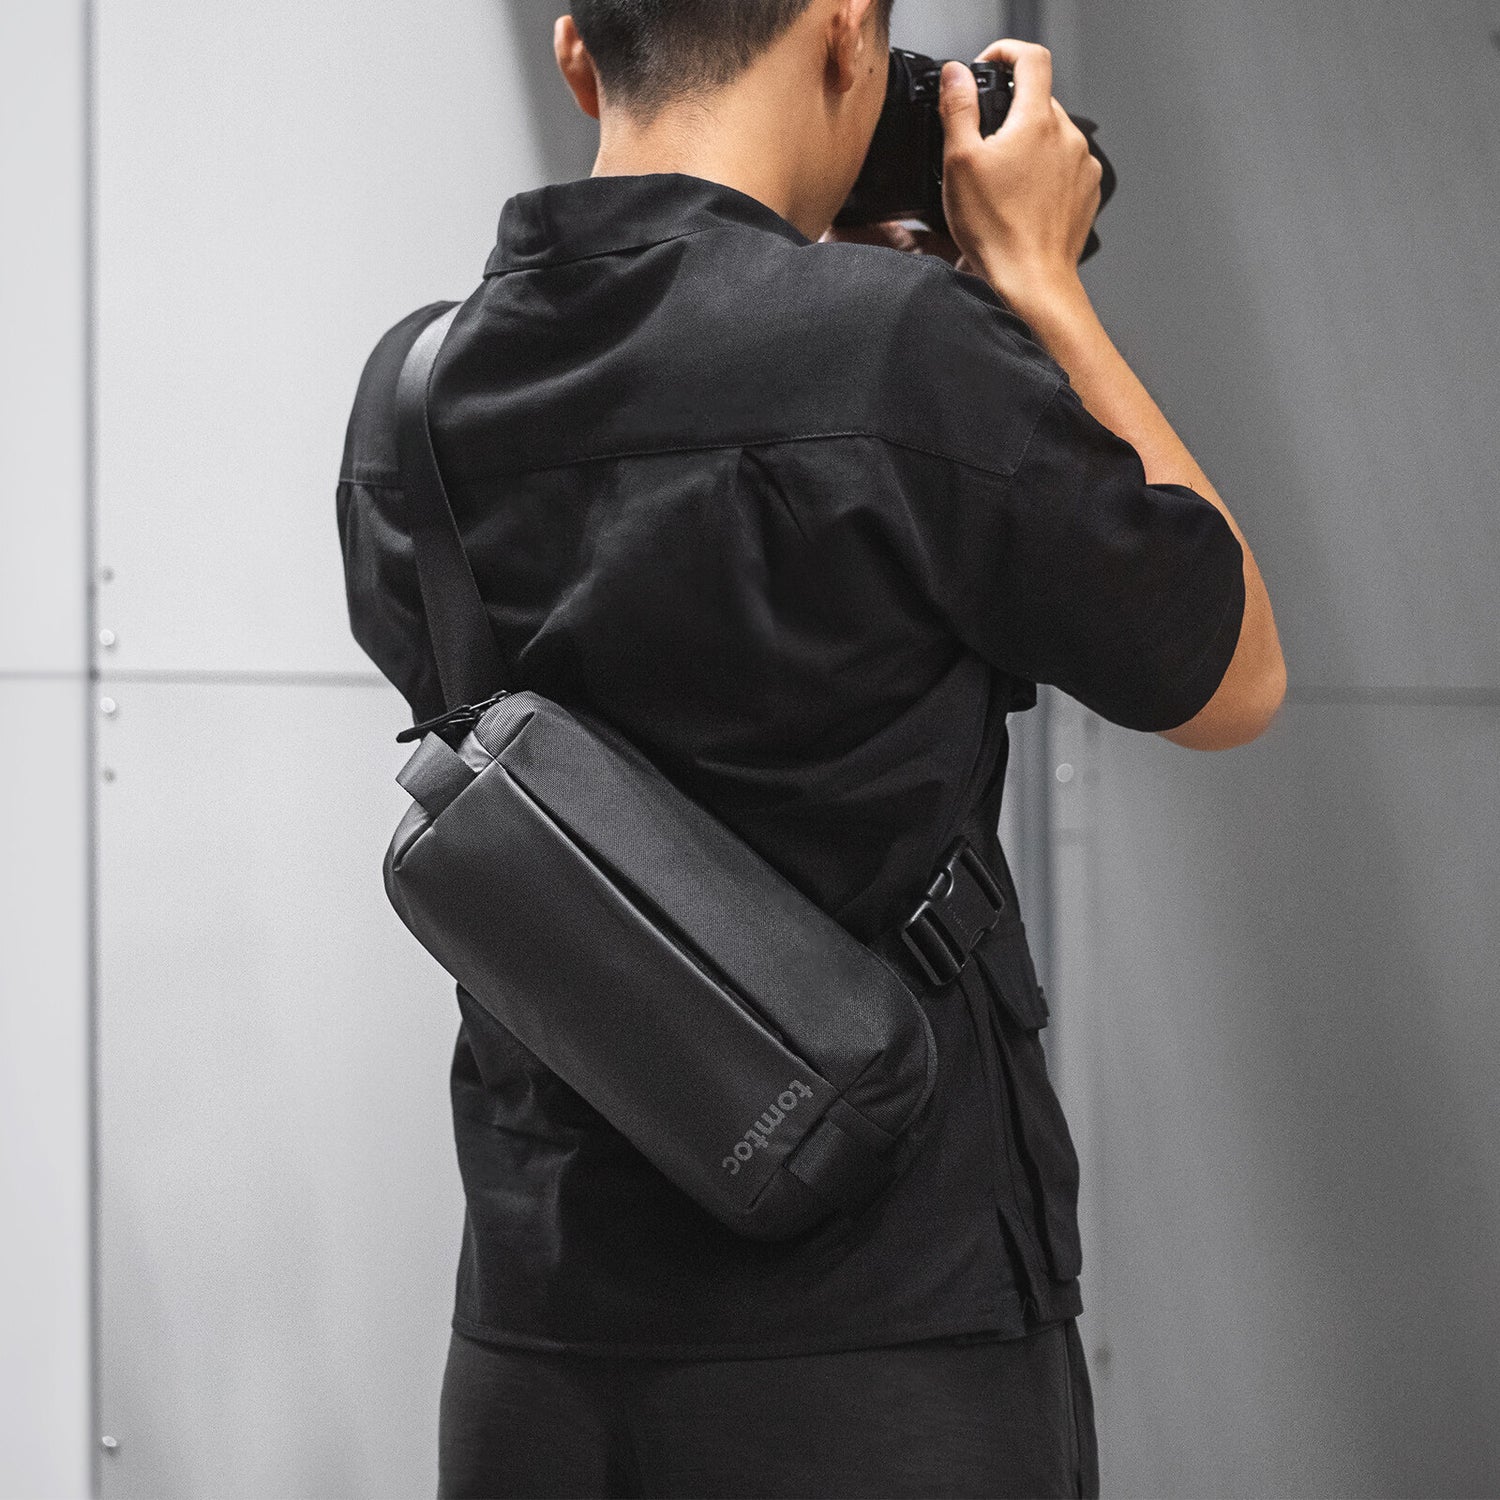 tomtoc Minimalist EDC Sling Men Bag Review: Stylish and Functional Crossbody Bag for Everyday Use